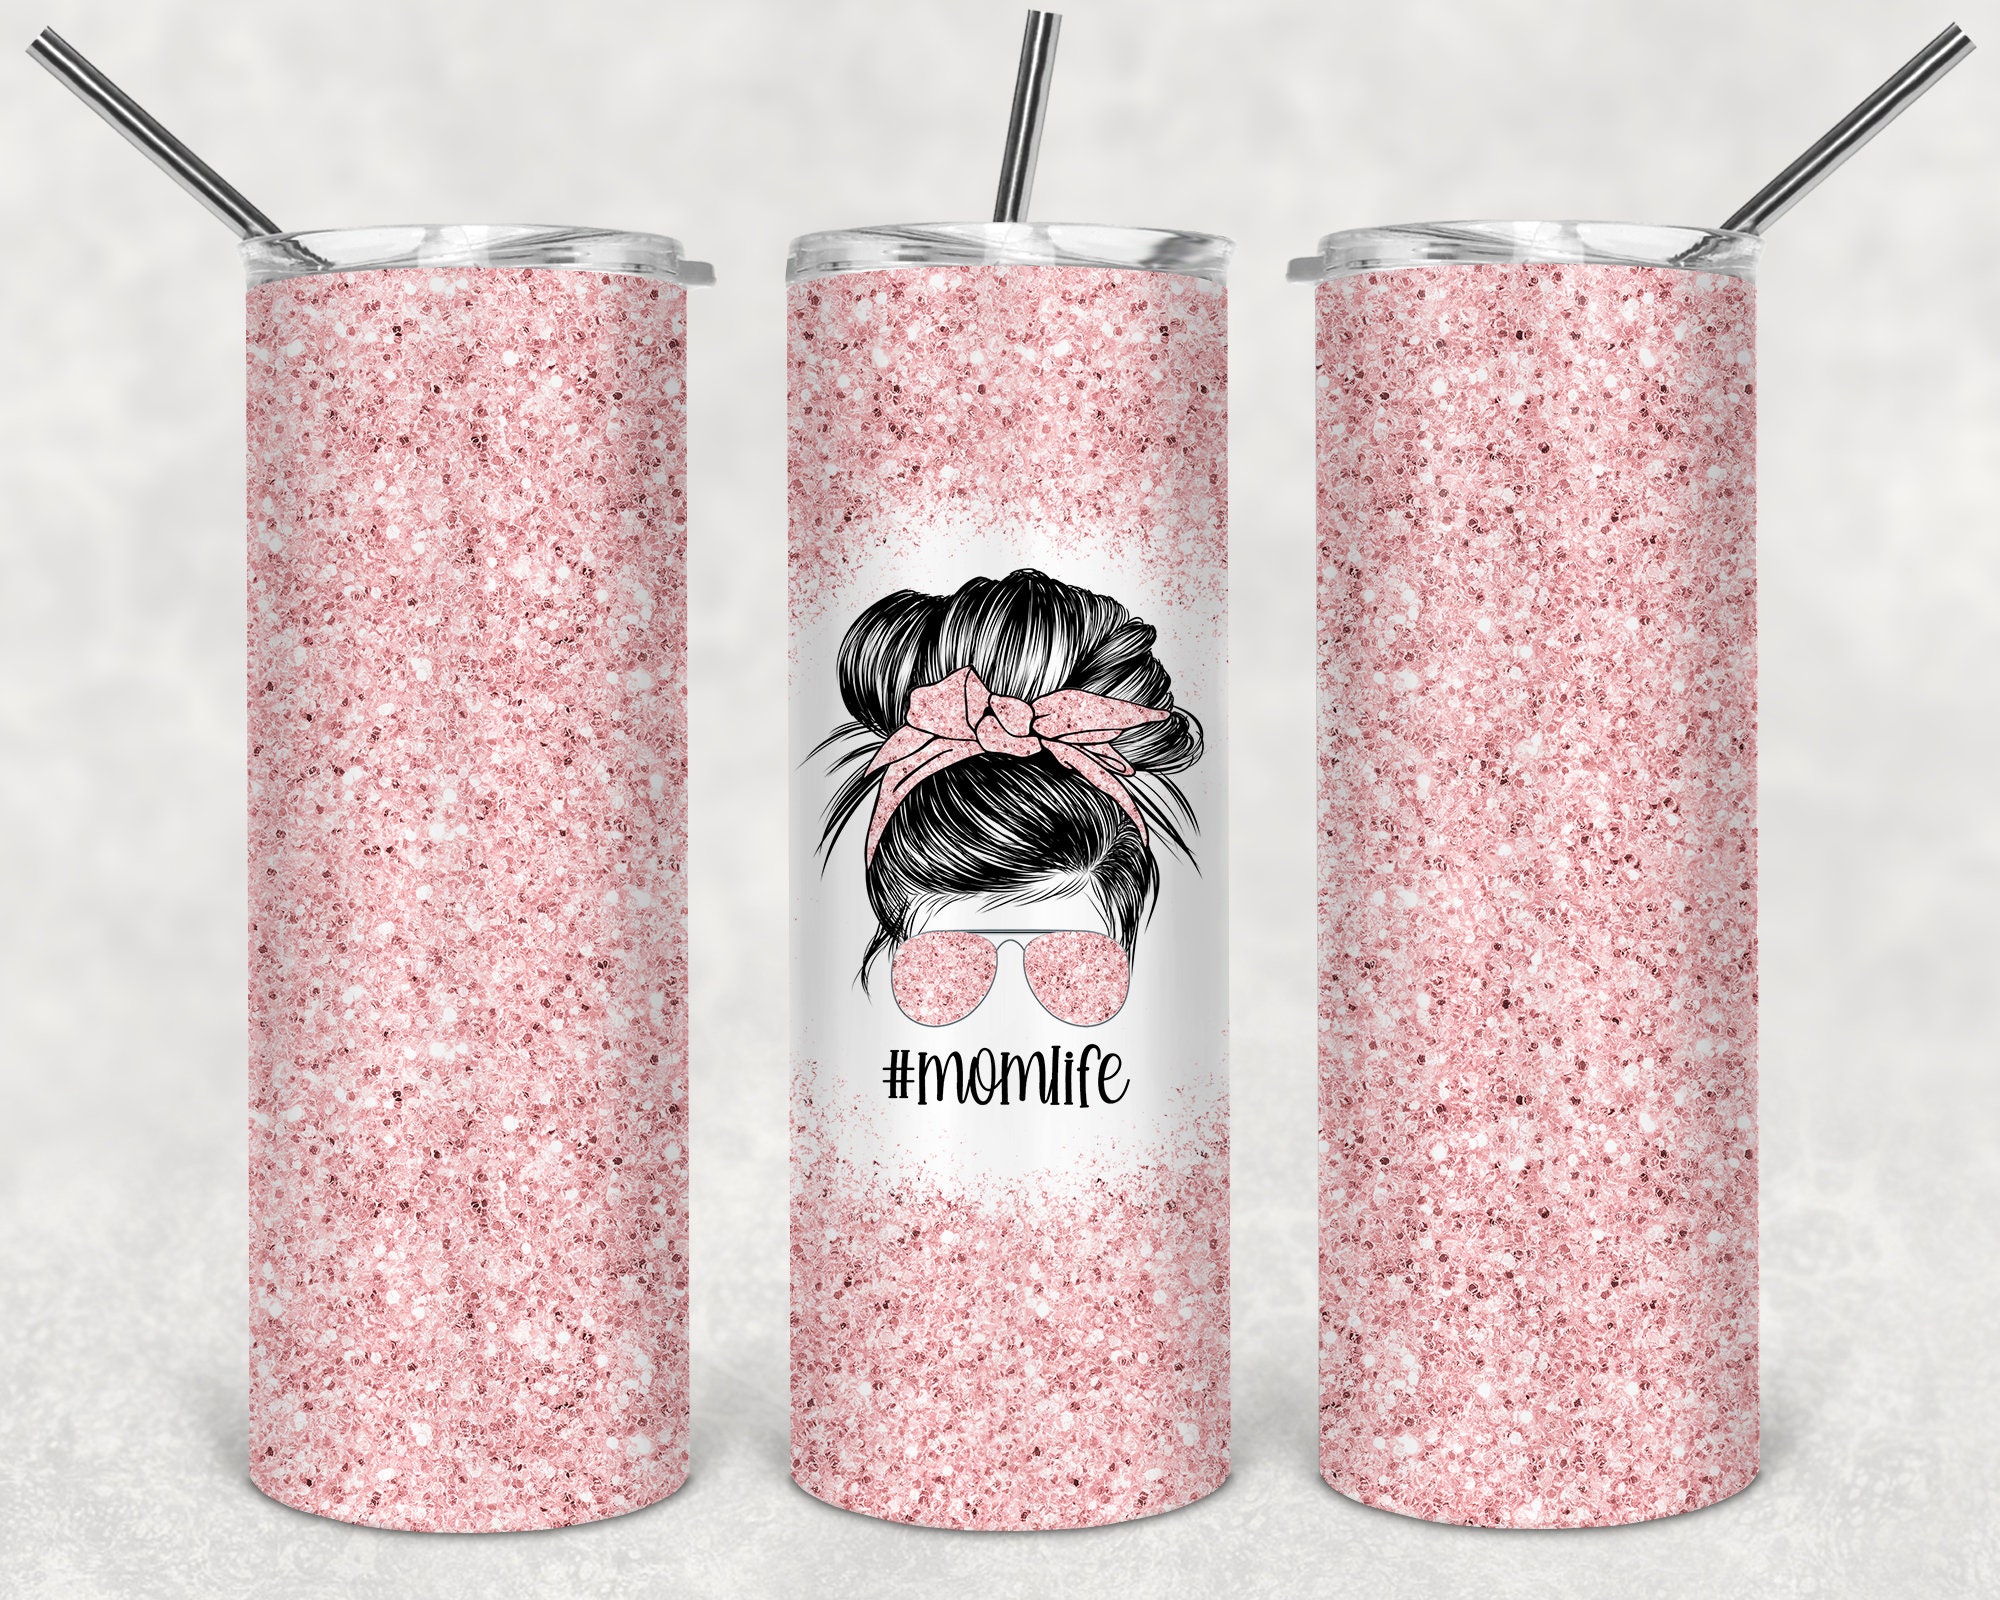 How to Print Sublimation Glitter Tumblers? 